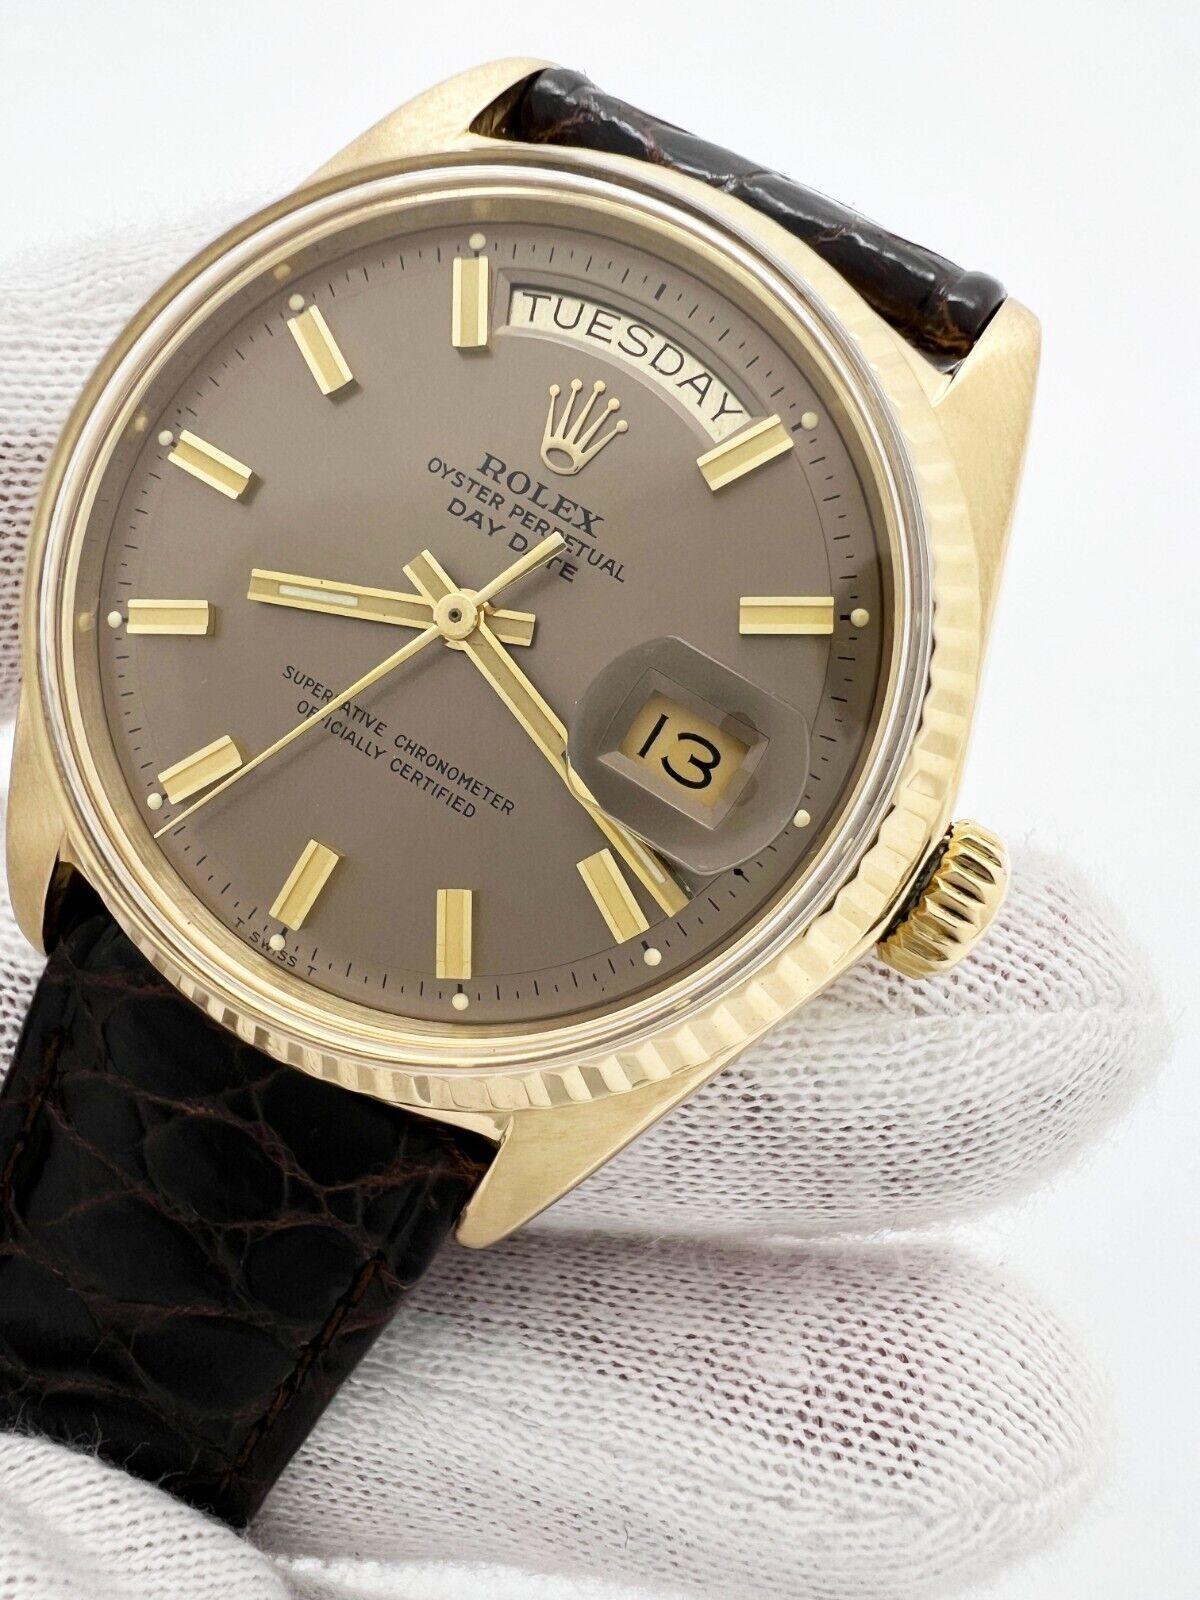 Style Number: 1803

Serial: 2568668

Year: 1970
 
Model: President Day Date
 
Case Material: 18K Yellow Gold Case
 
Band: Brown Leather Band 
 
Bezel: 18K Yellow Gold 
 
Dial: Rare Bronze Pie Pan With 